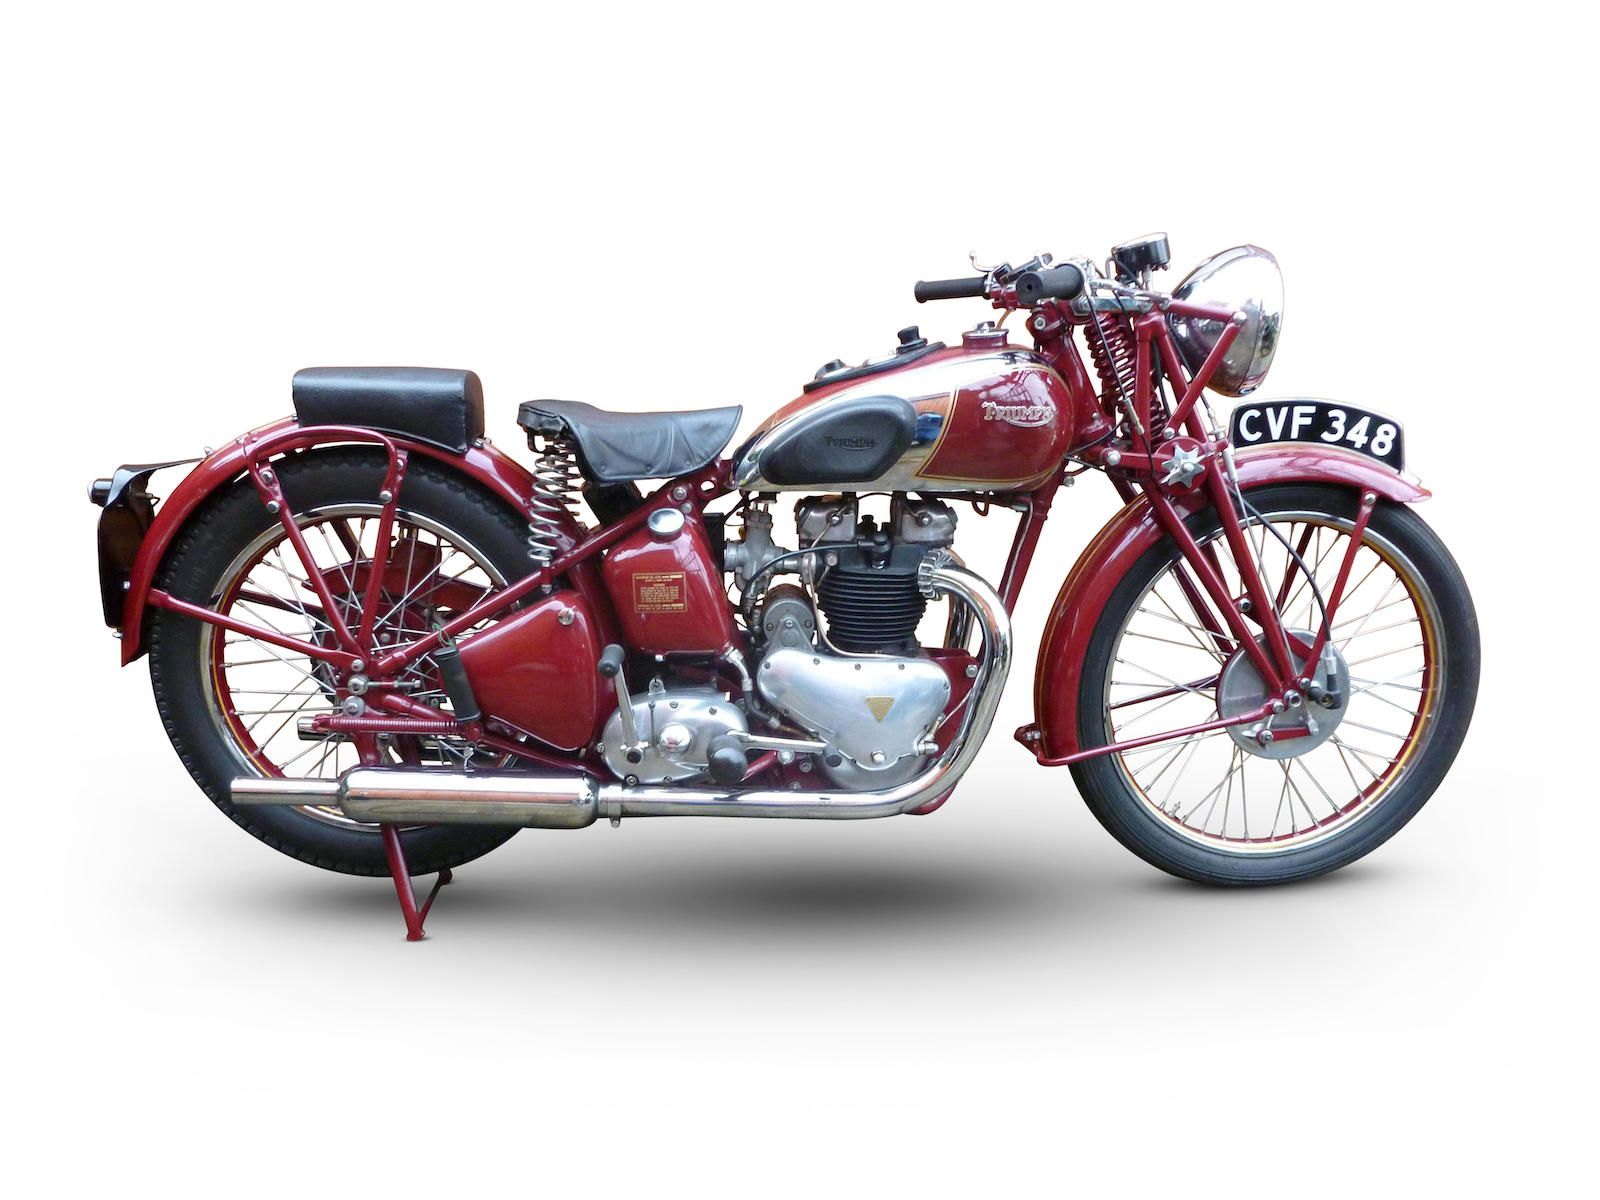 10 Classic Triumph Motorcycles That Defined An Era